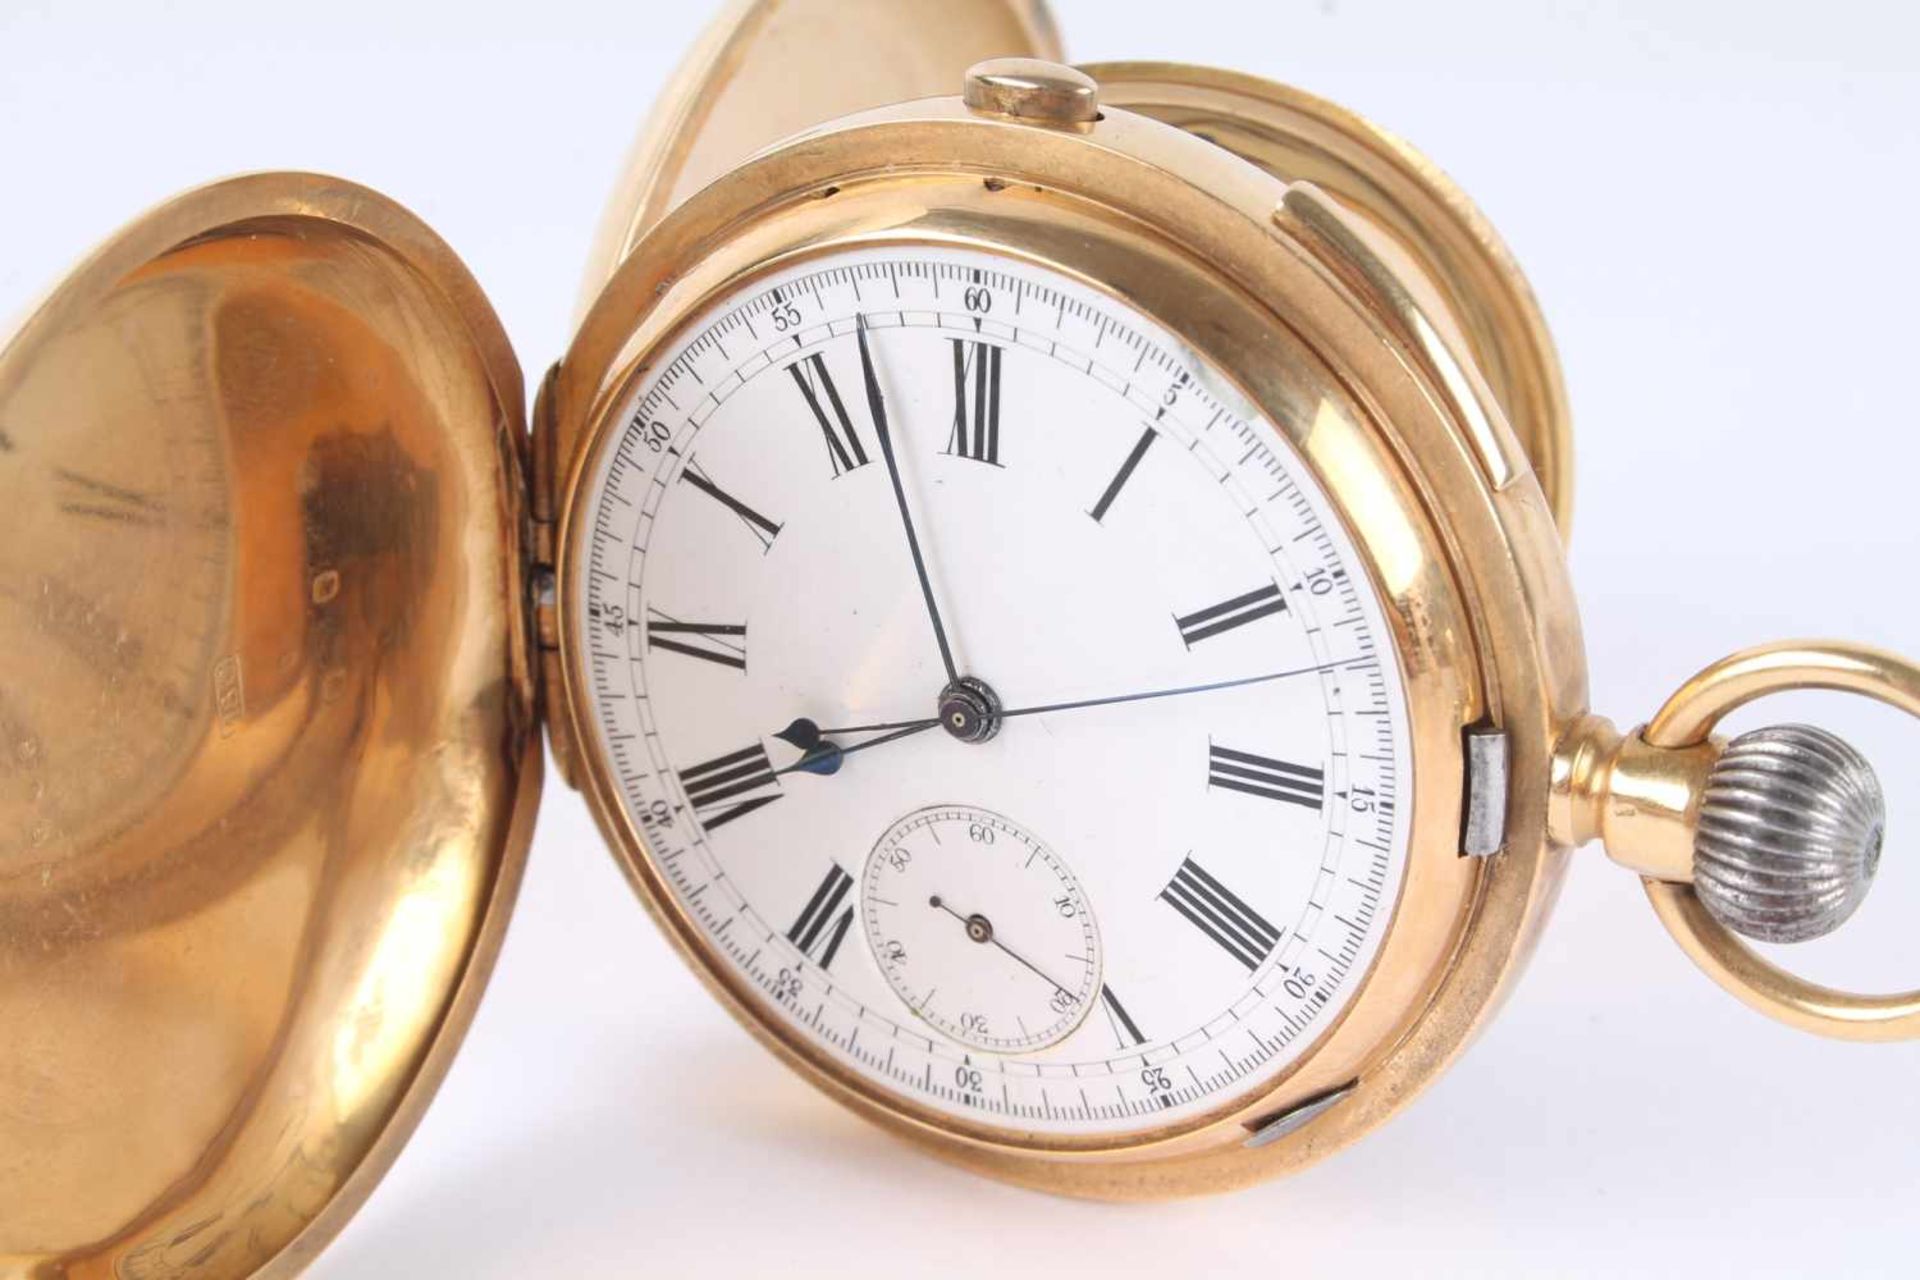 750 Gold Savonette mit Repetition und Stoppuhr, 18K gold savonette with repeater and stopwatch,